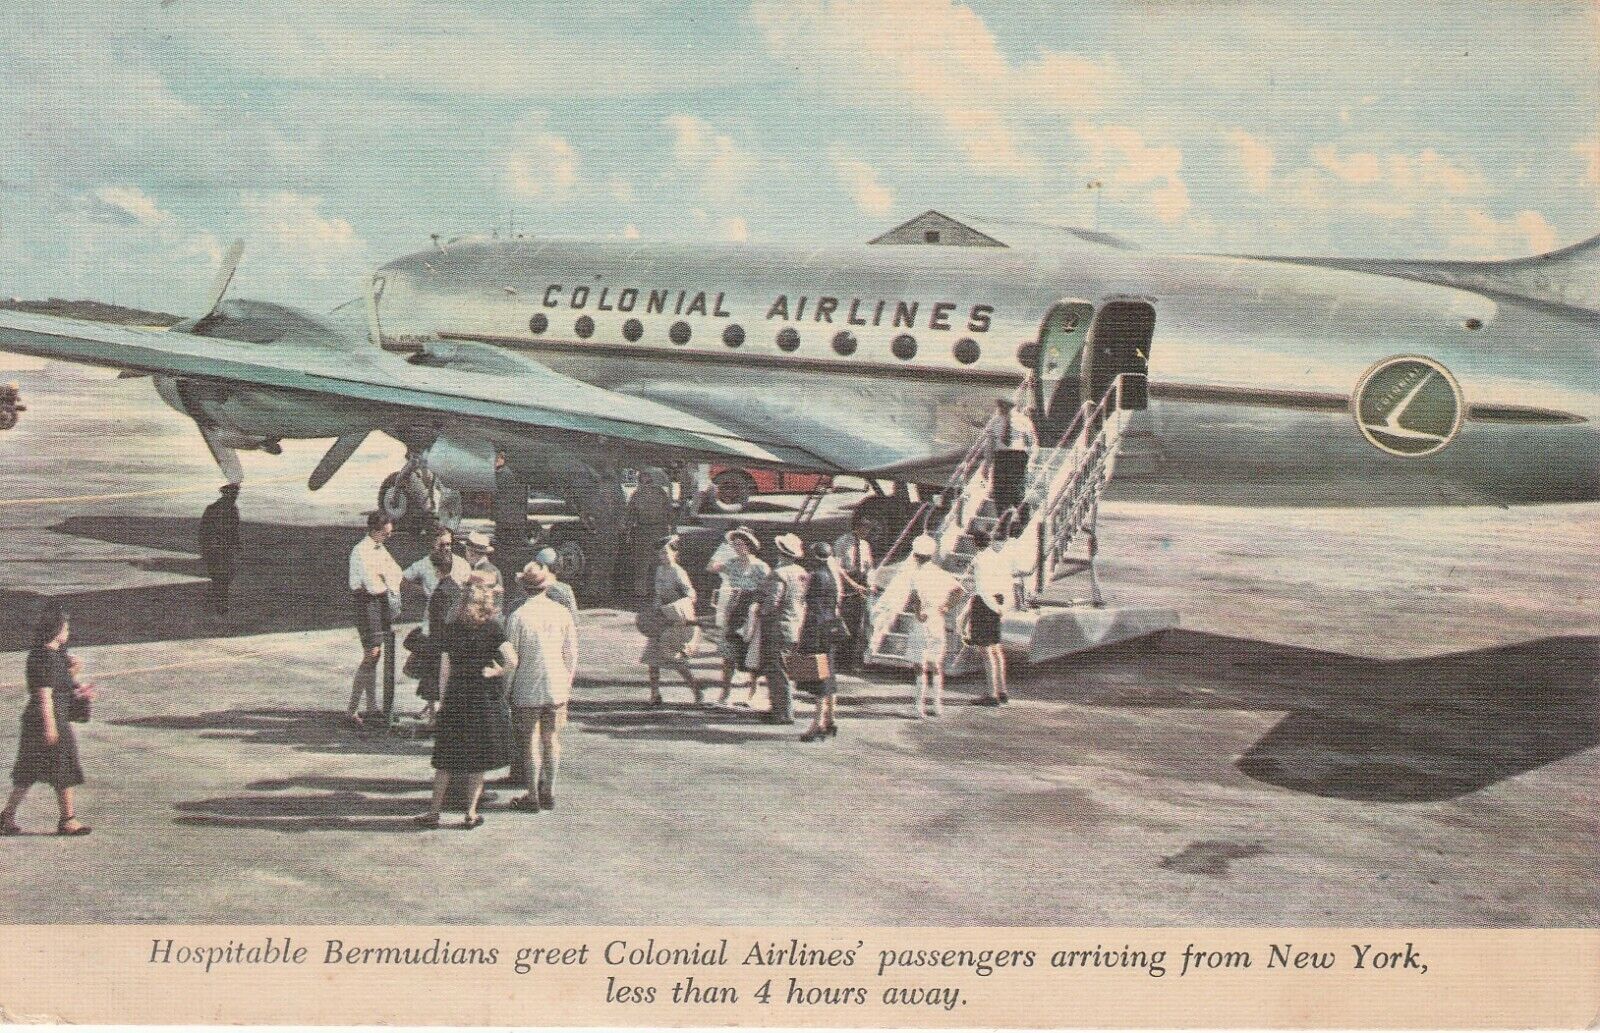 Colonial Airlines Airliner Airplane in Bermuda from New York